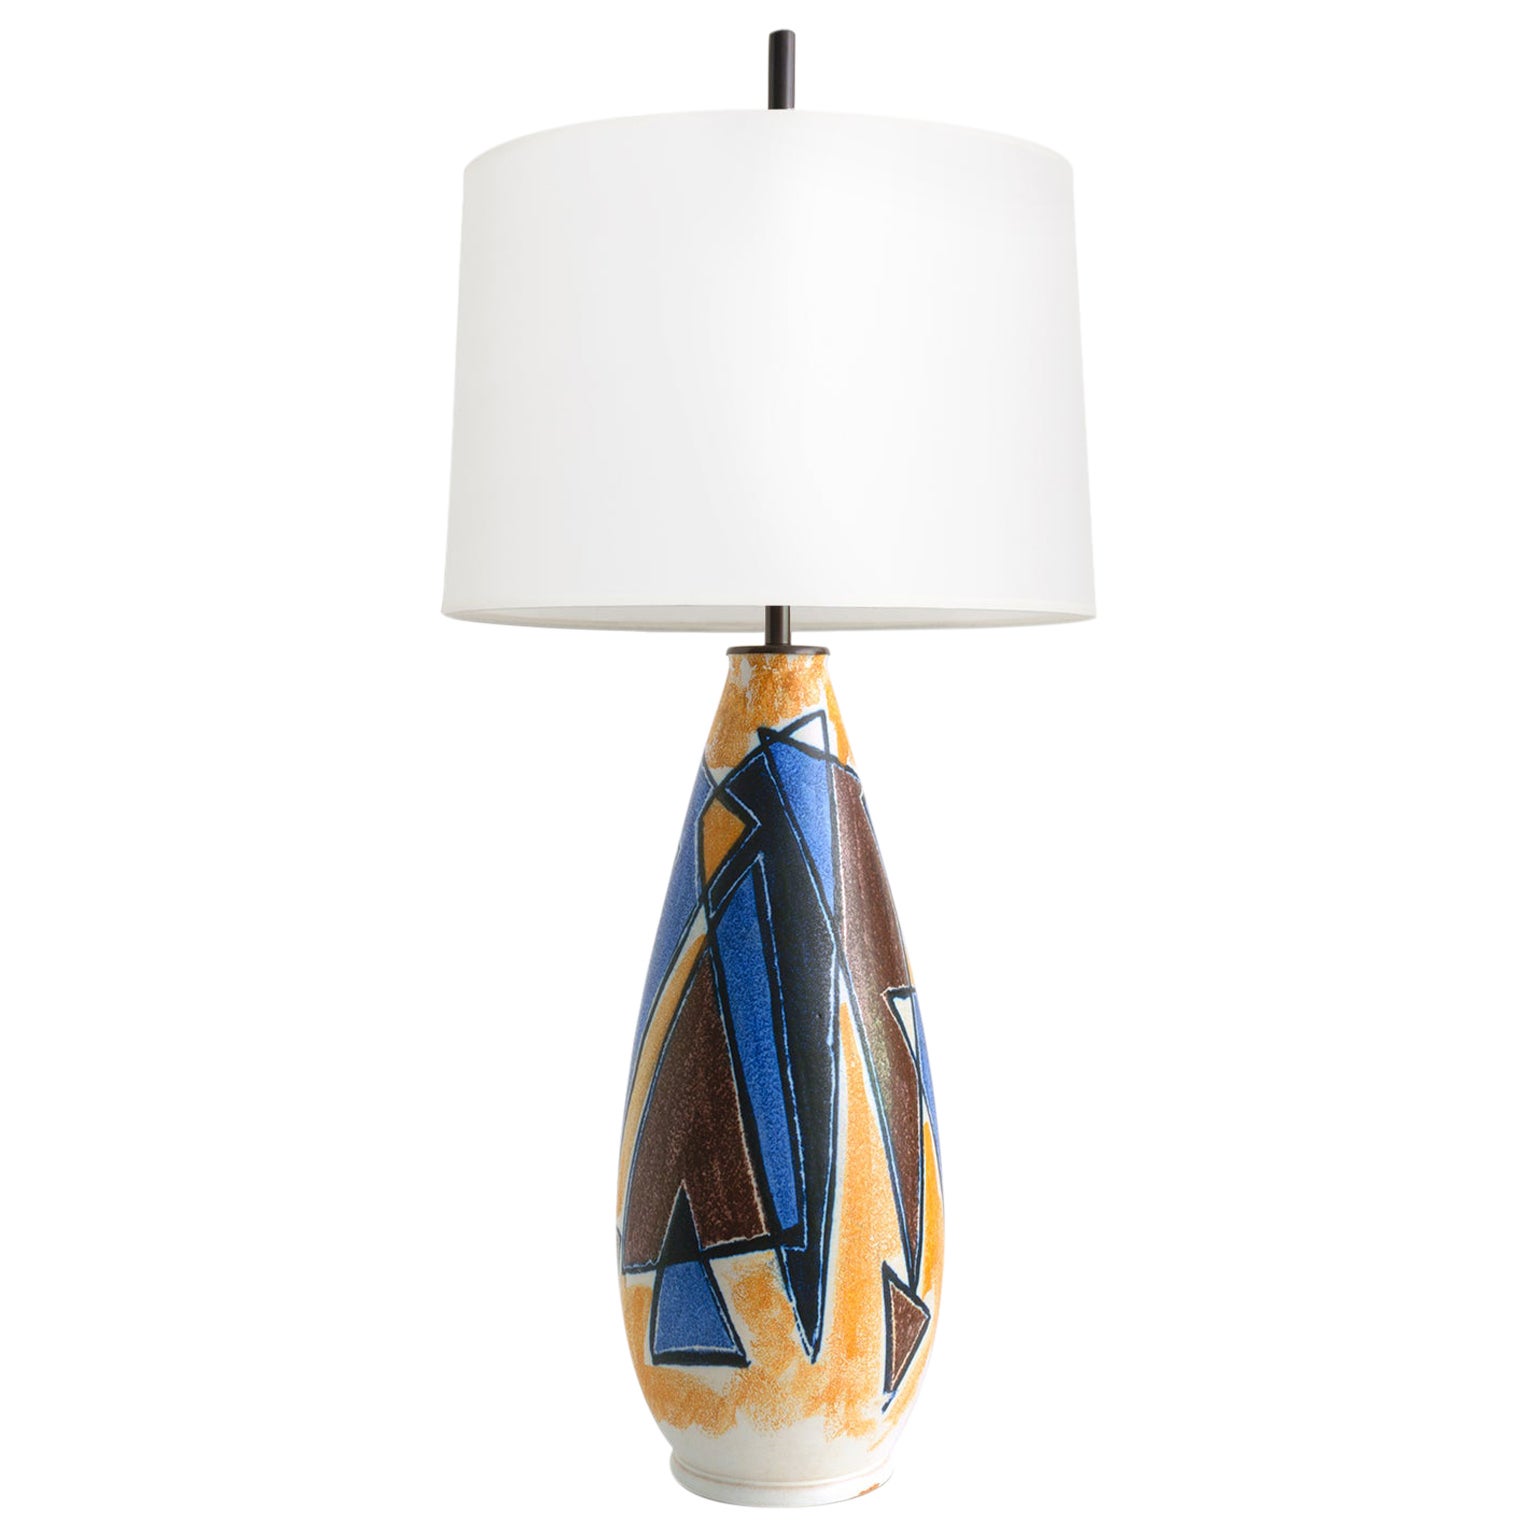 Scandinavian Modern Ceramic Lamp with Abstract Design Mette Doller for Hoganas For Sale